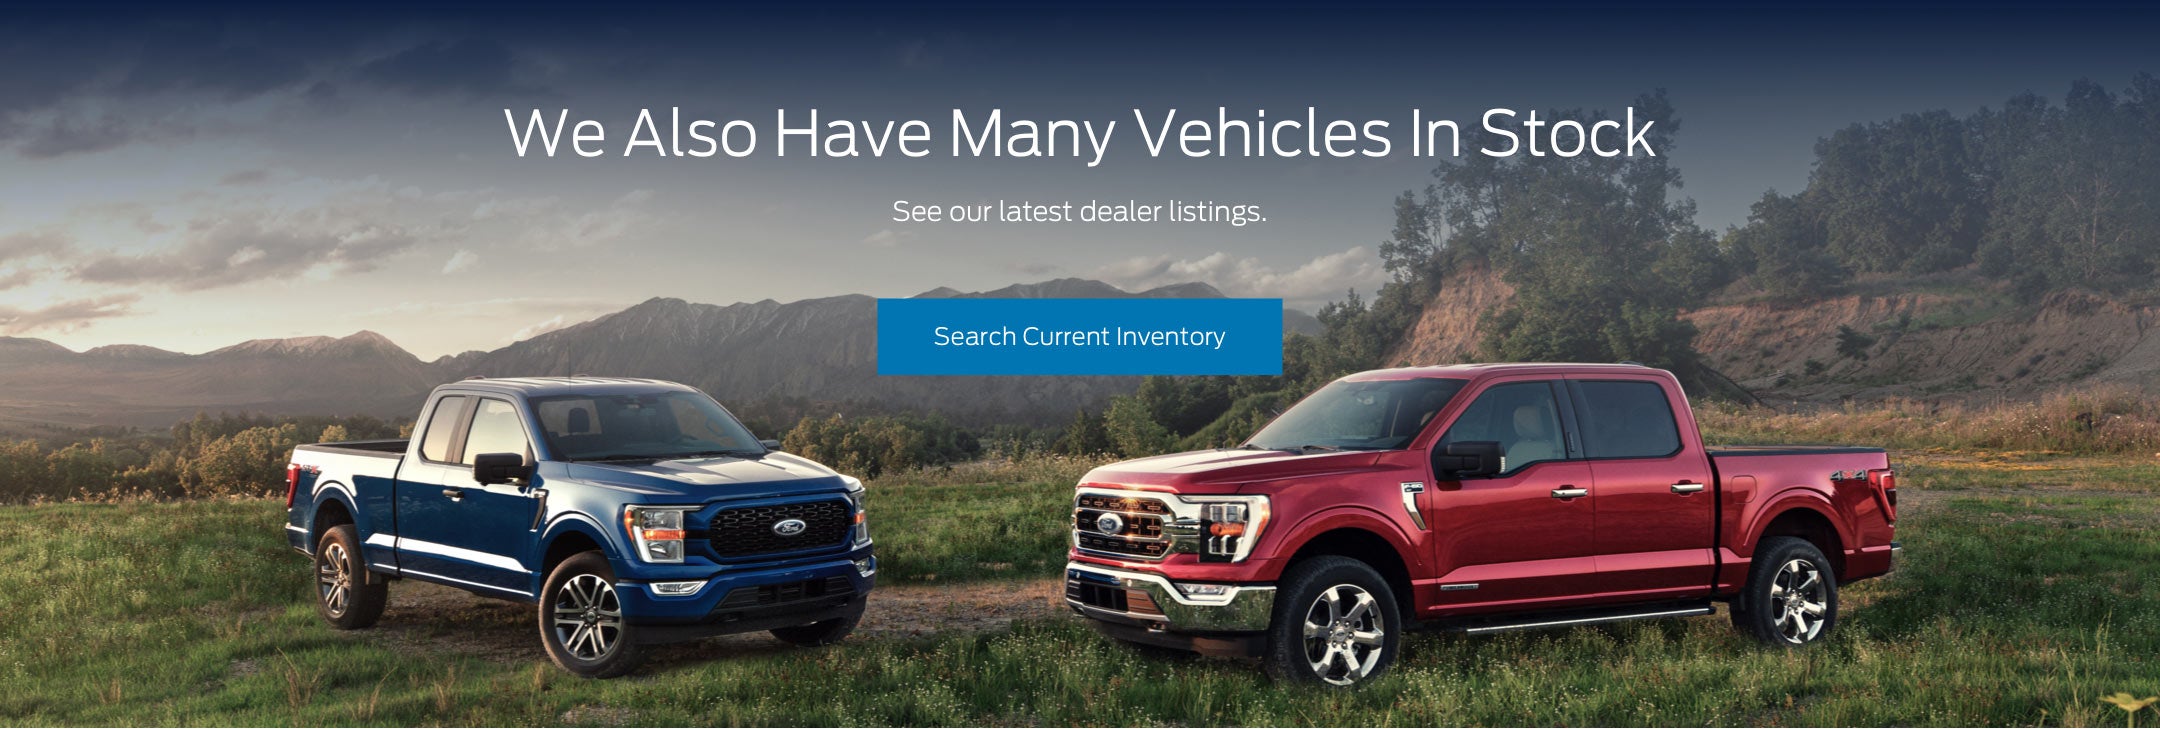 Ford vehicles in stock | North Country Motor Sales Inc. in Lancaster NH